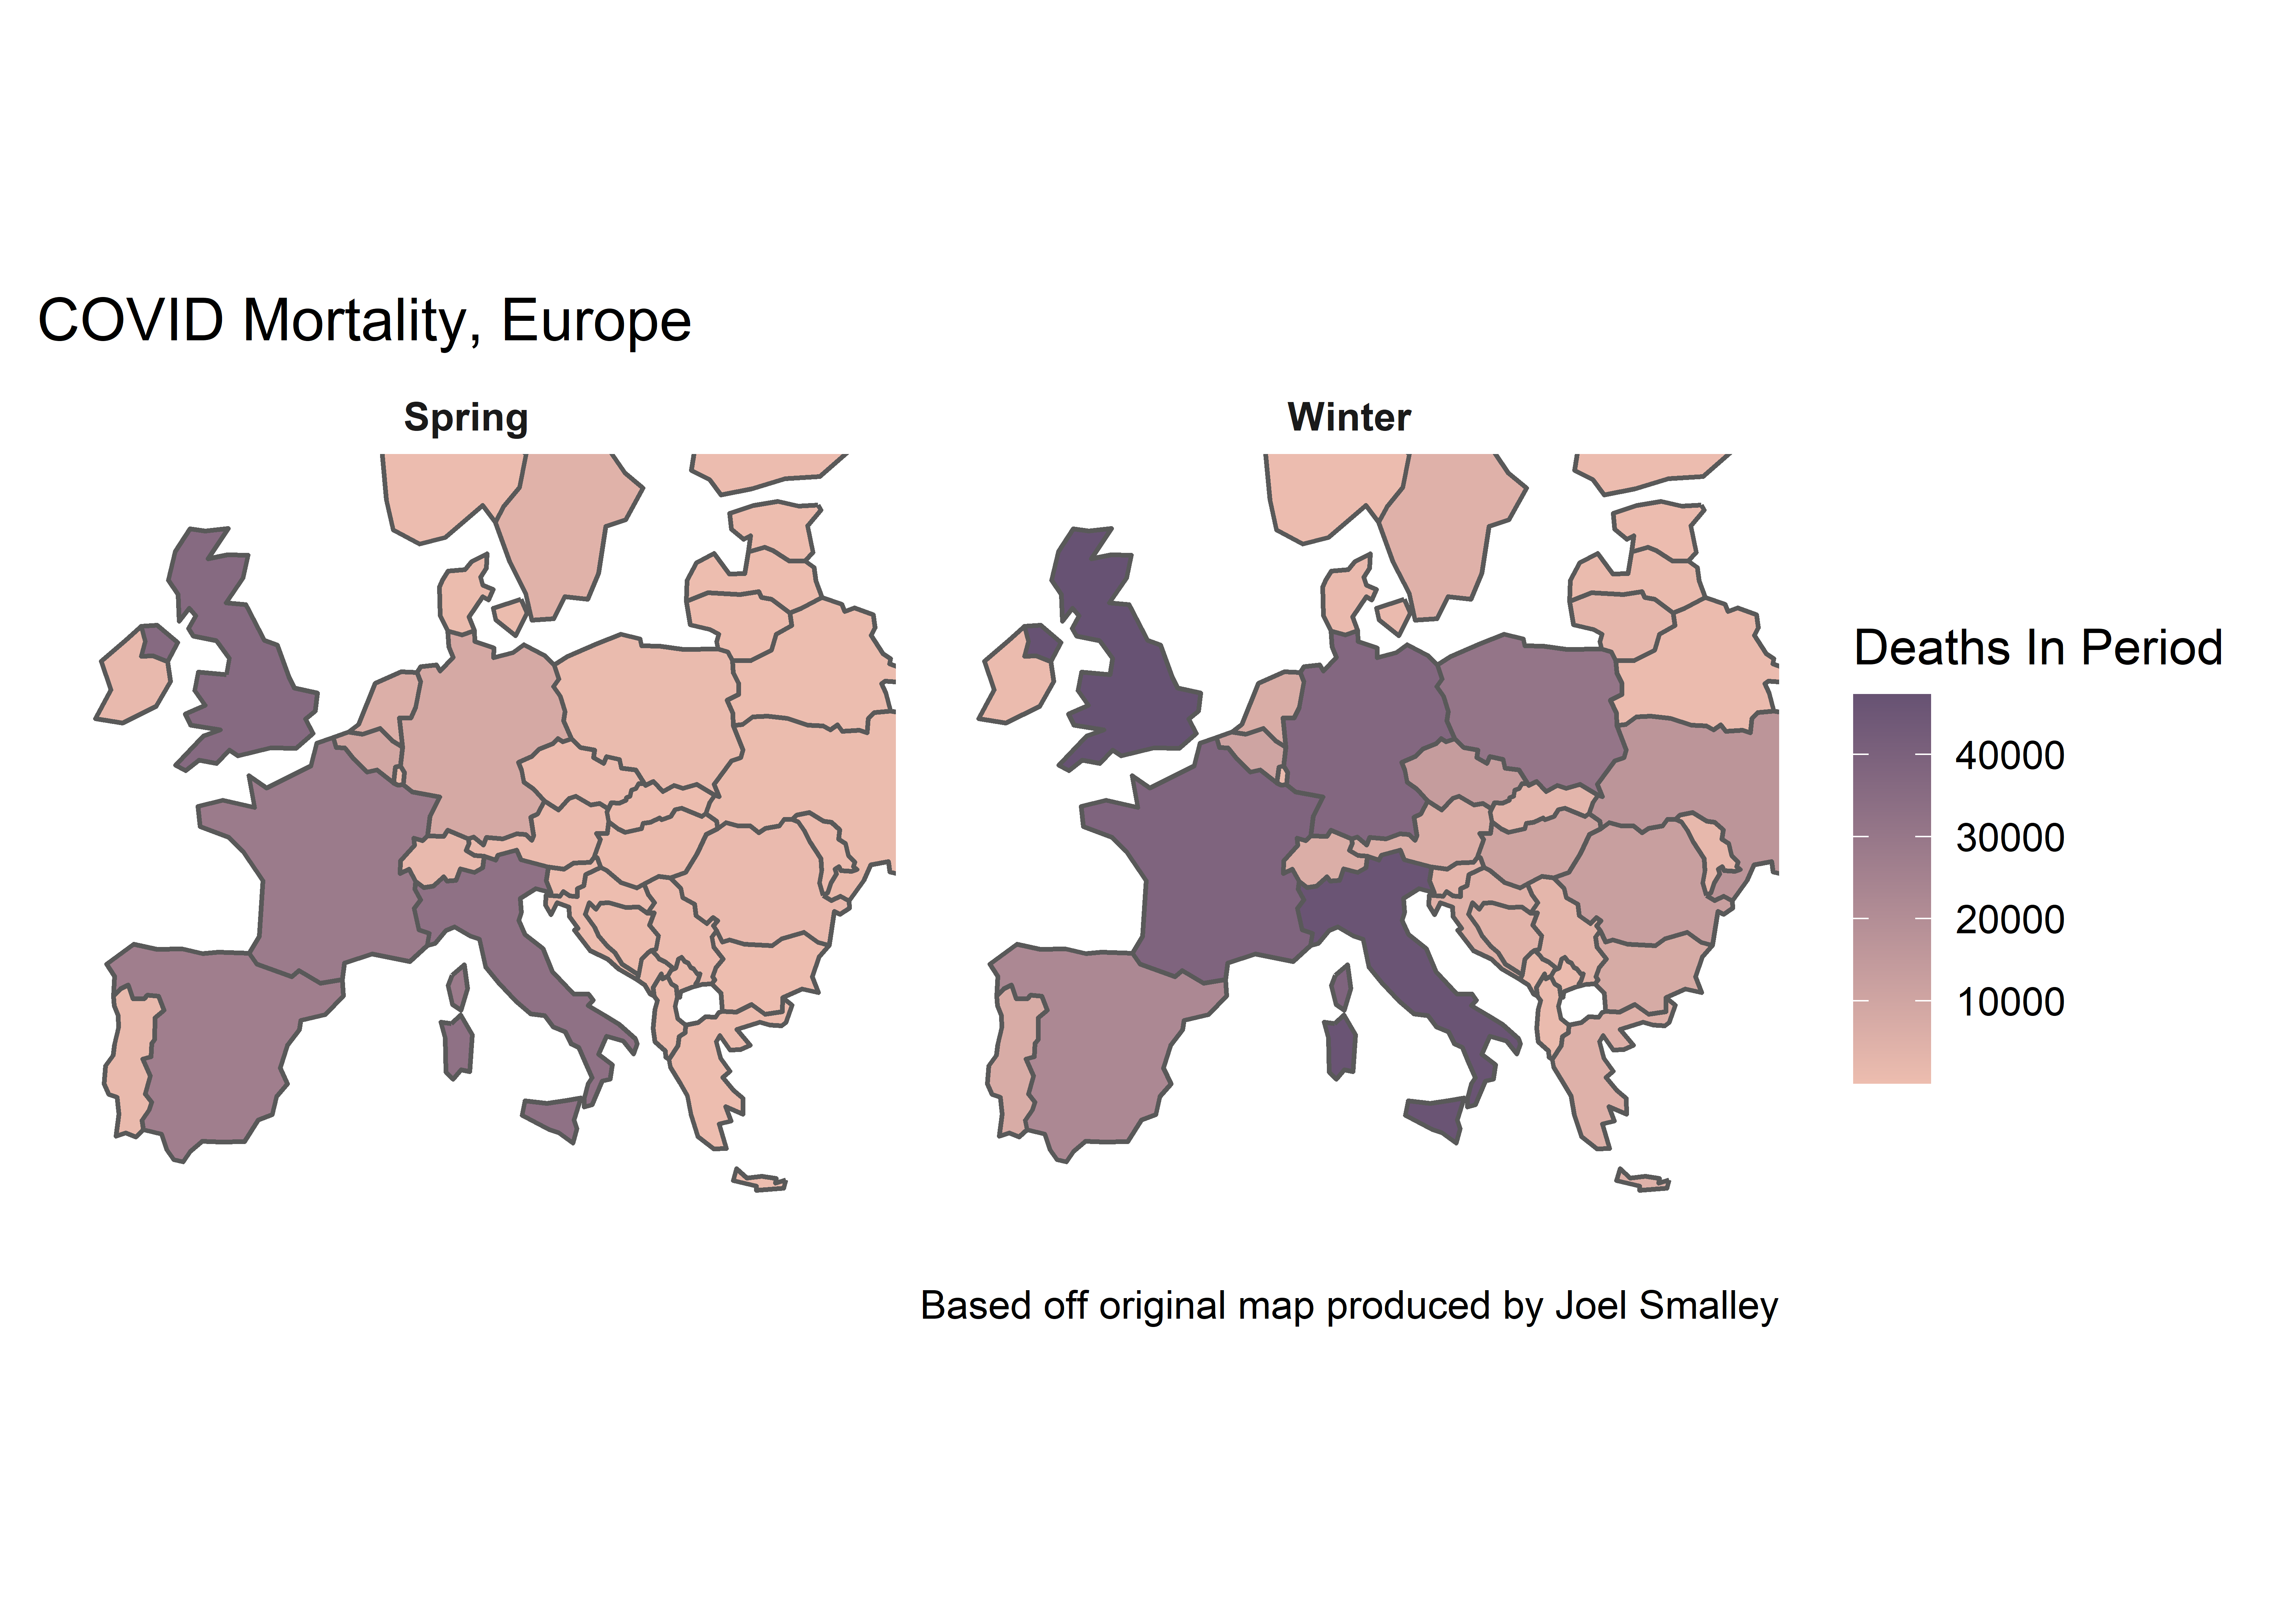 Map comparing Spring and Winter Covid Deaths, reproduced based on Joel Smalley's work